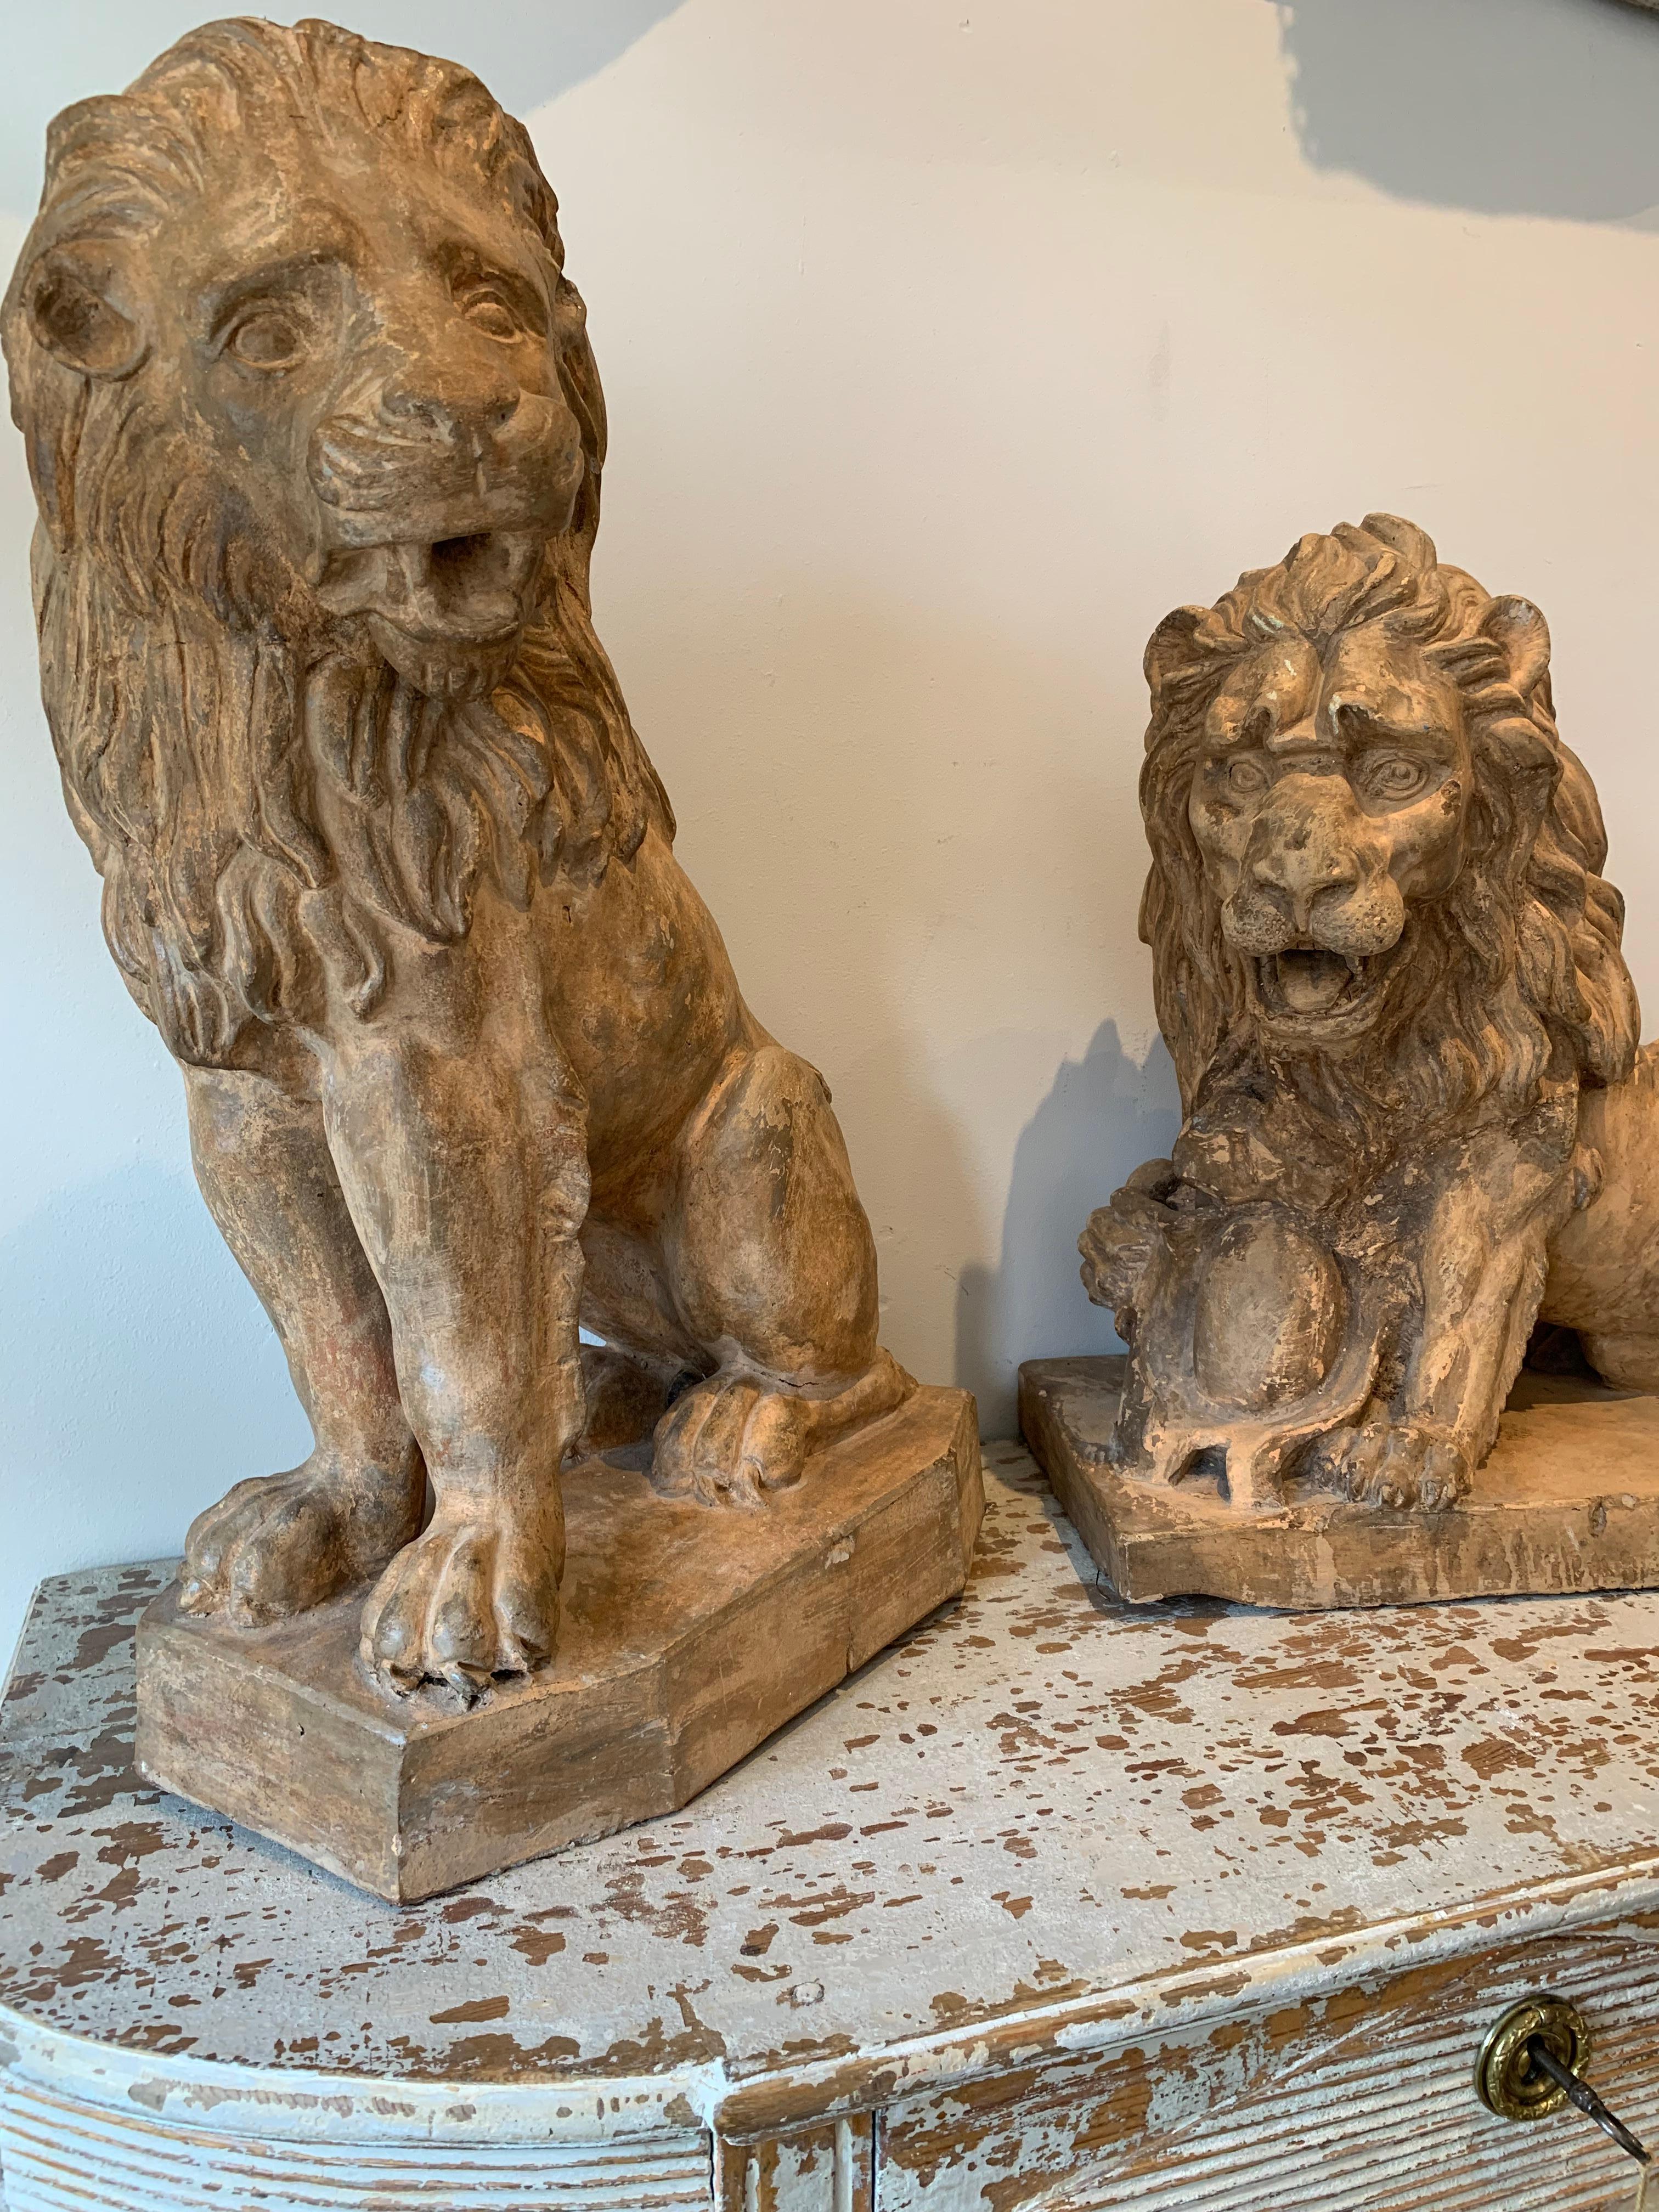 Fabulous pair of early circa 19th century French lions in a warm honey coloured terracotta.
Both are stylised and life like, with manes, with one a bobbed tail seated upright and the other slightly reclining with its paw on a heraldic shield.
In